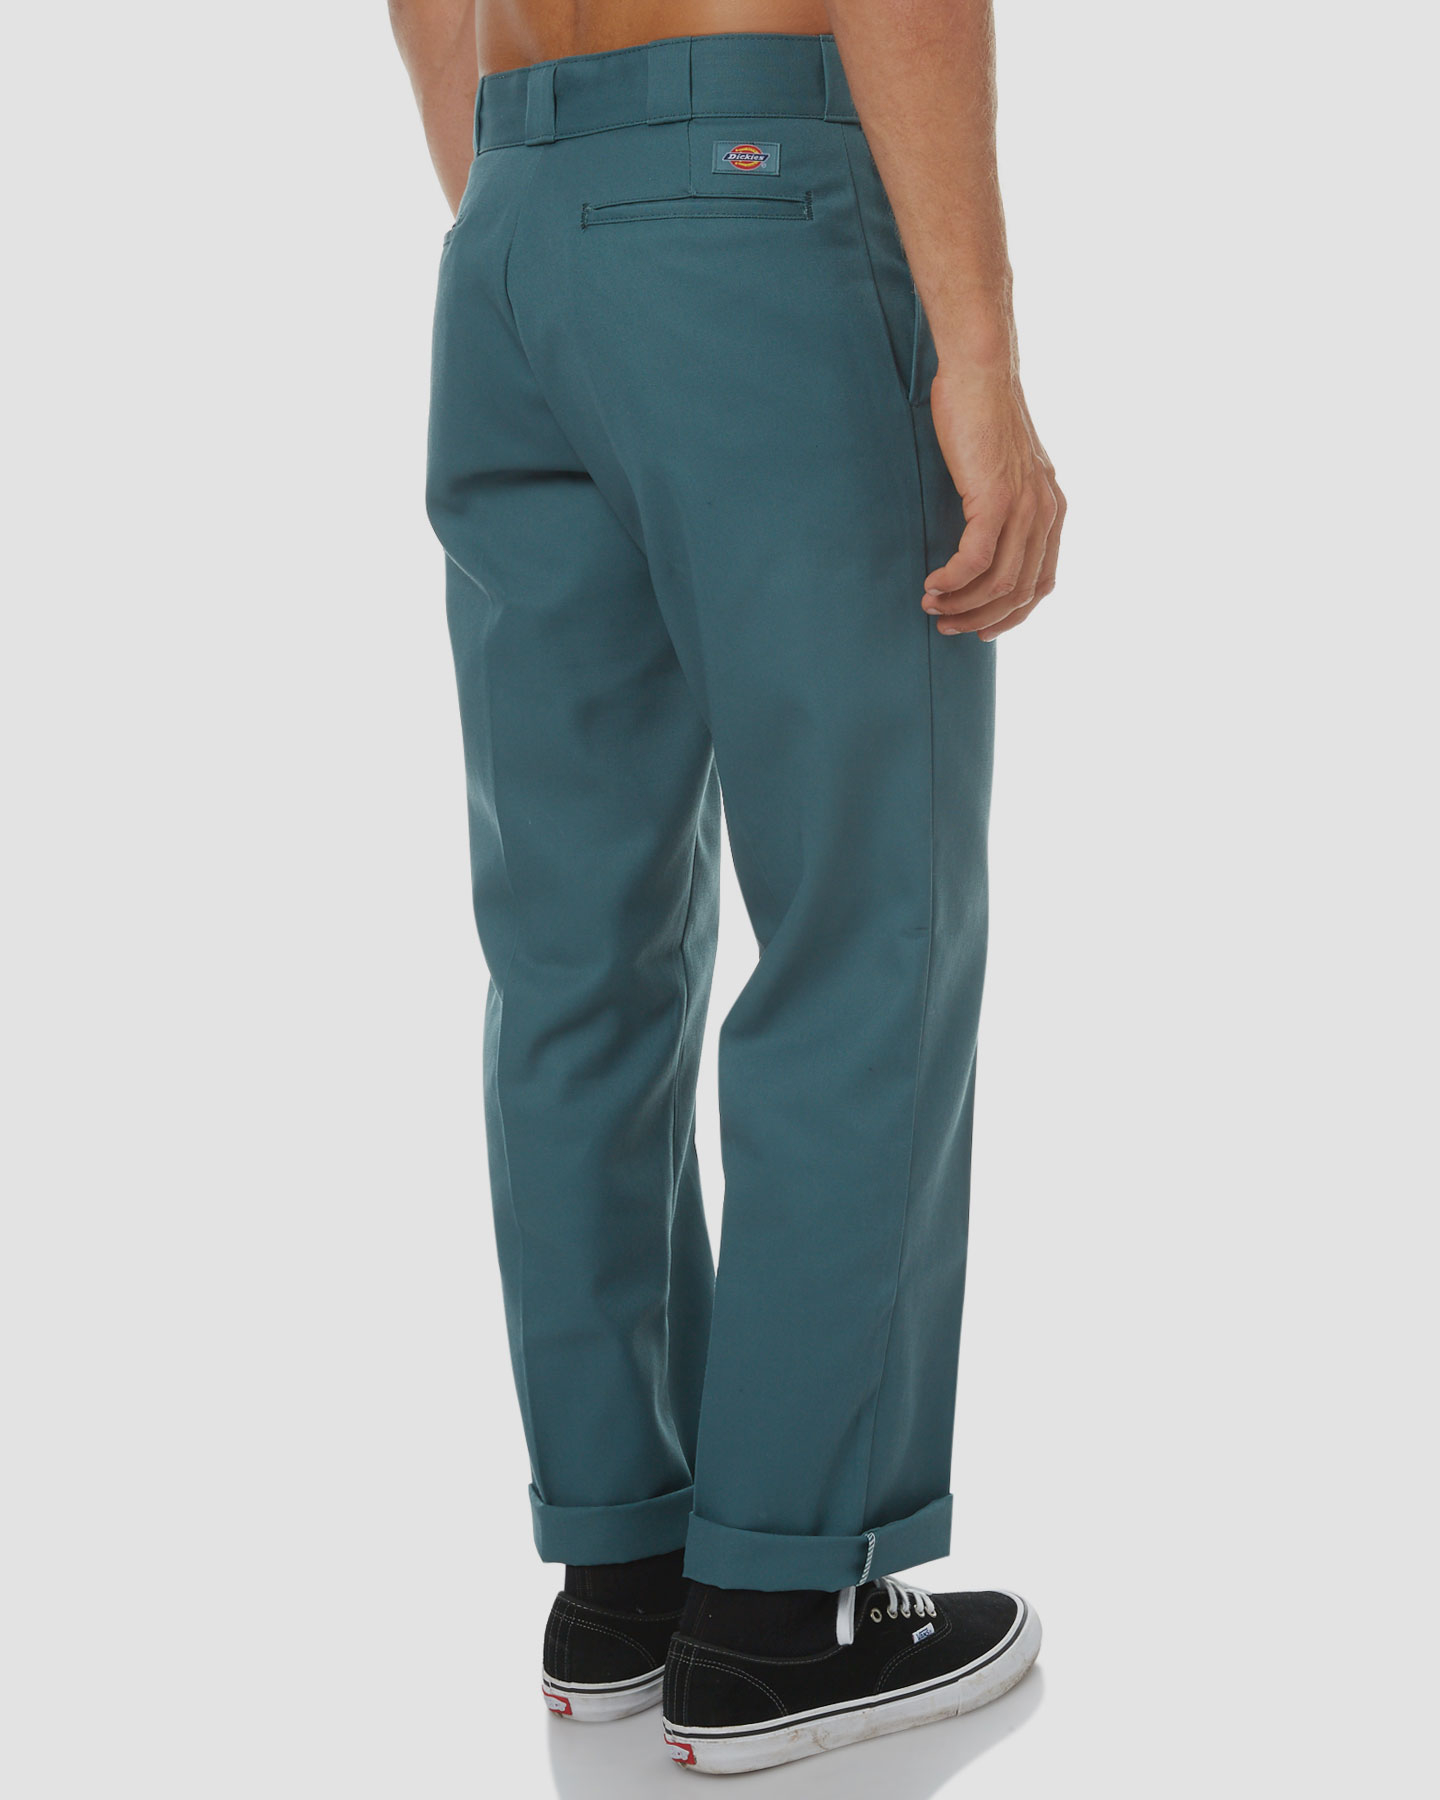 Dickies 874 Original Fit Work Pant Lincoln Green SurfStitch - Size ...